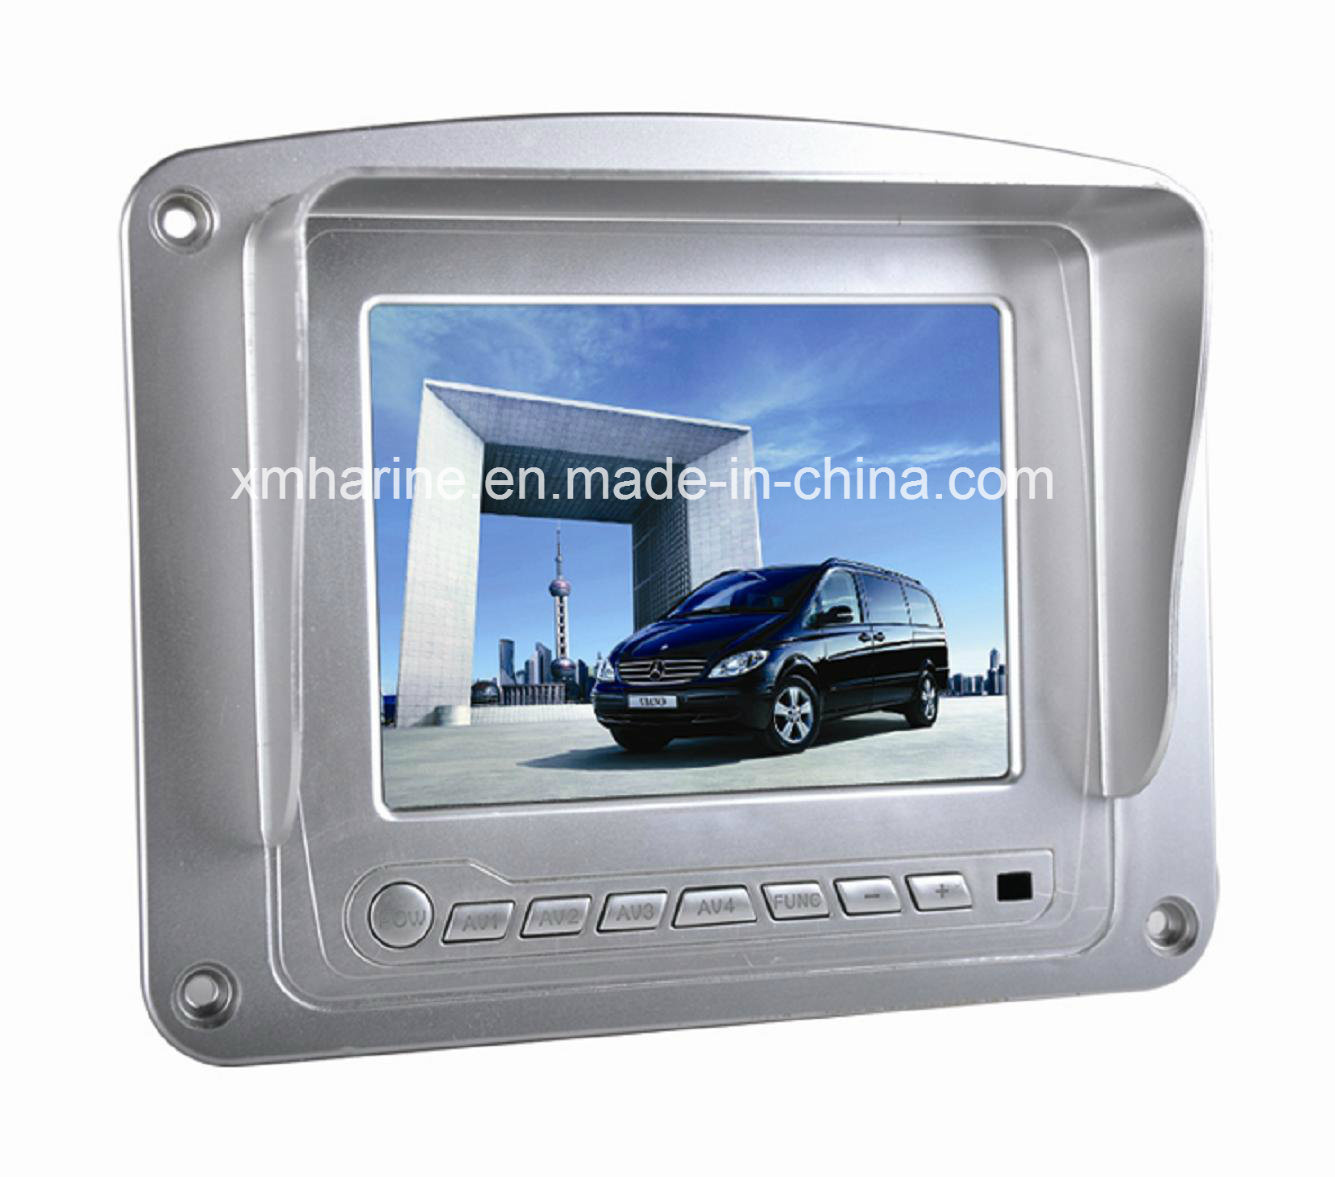 5.6inches LCD Color Car Parking System